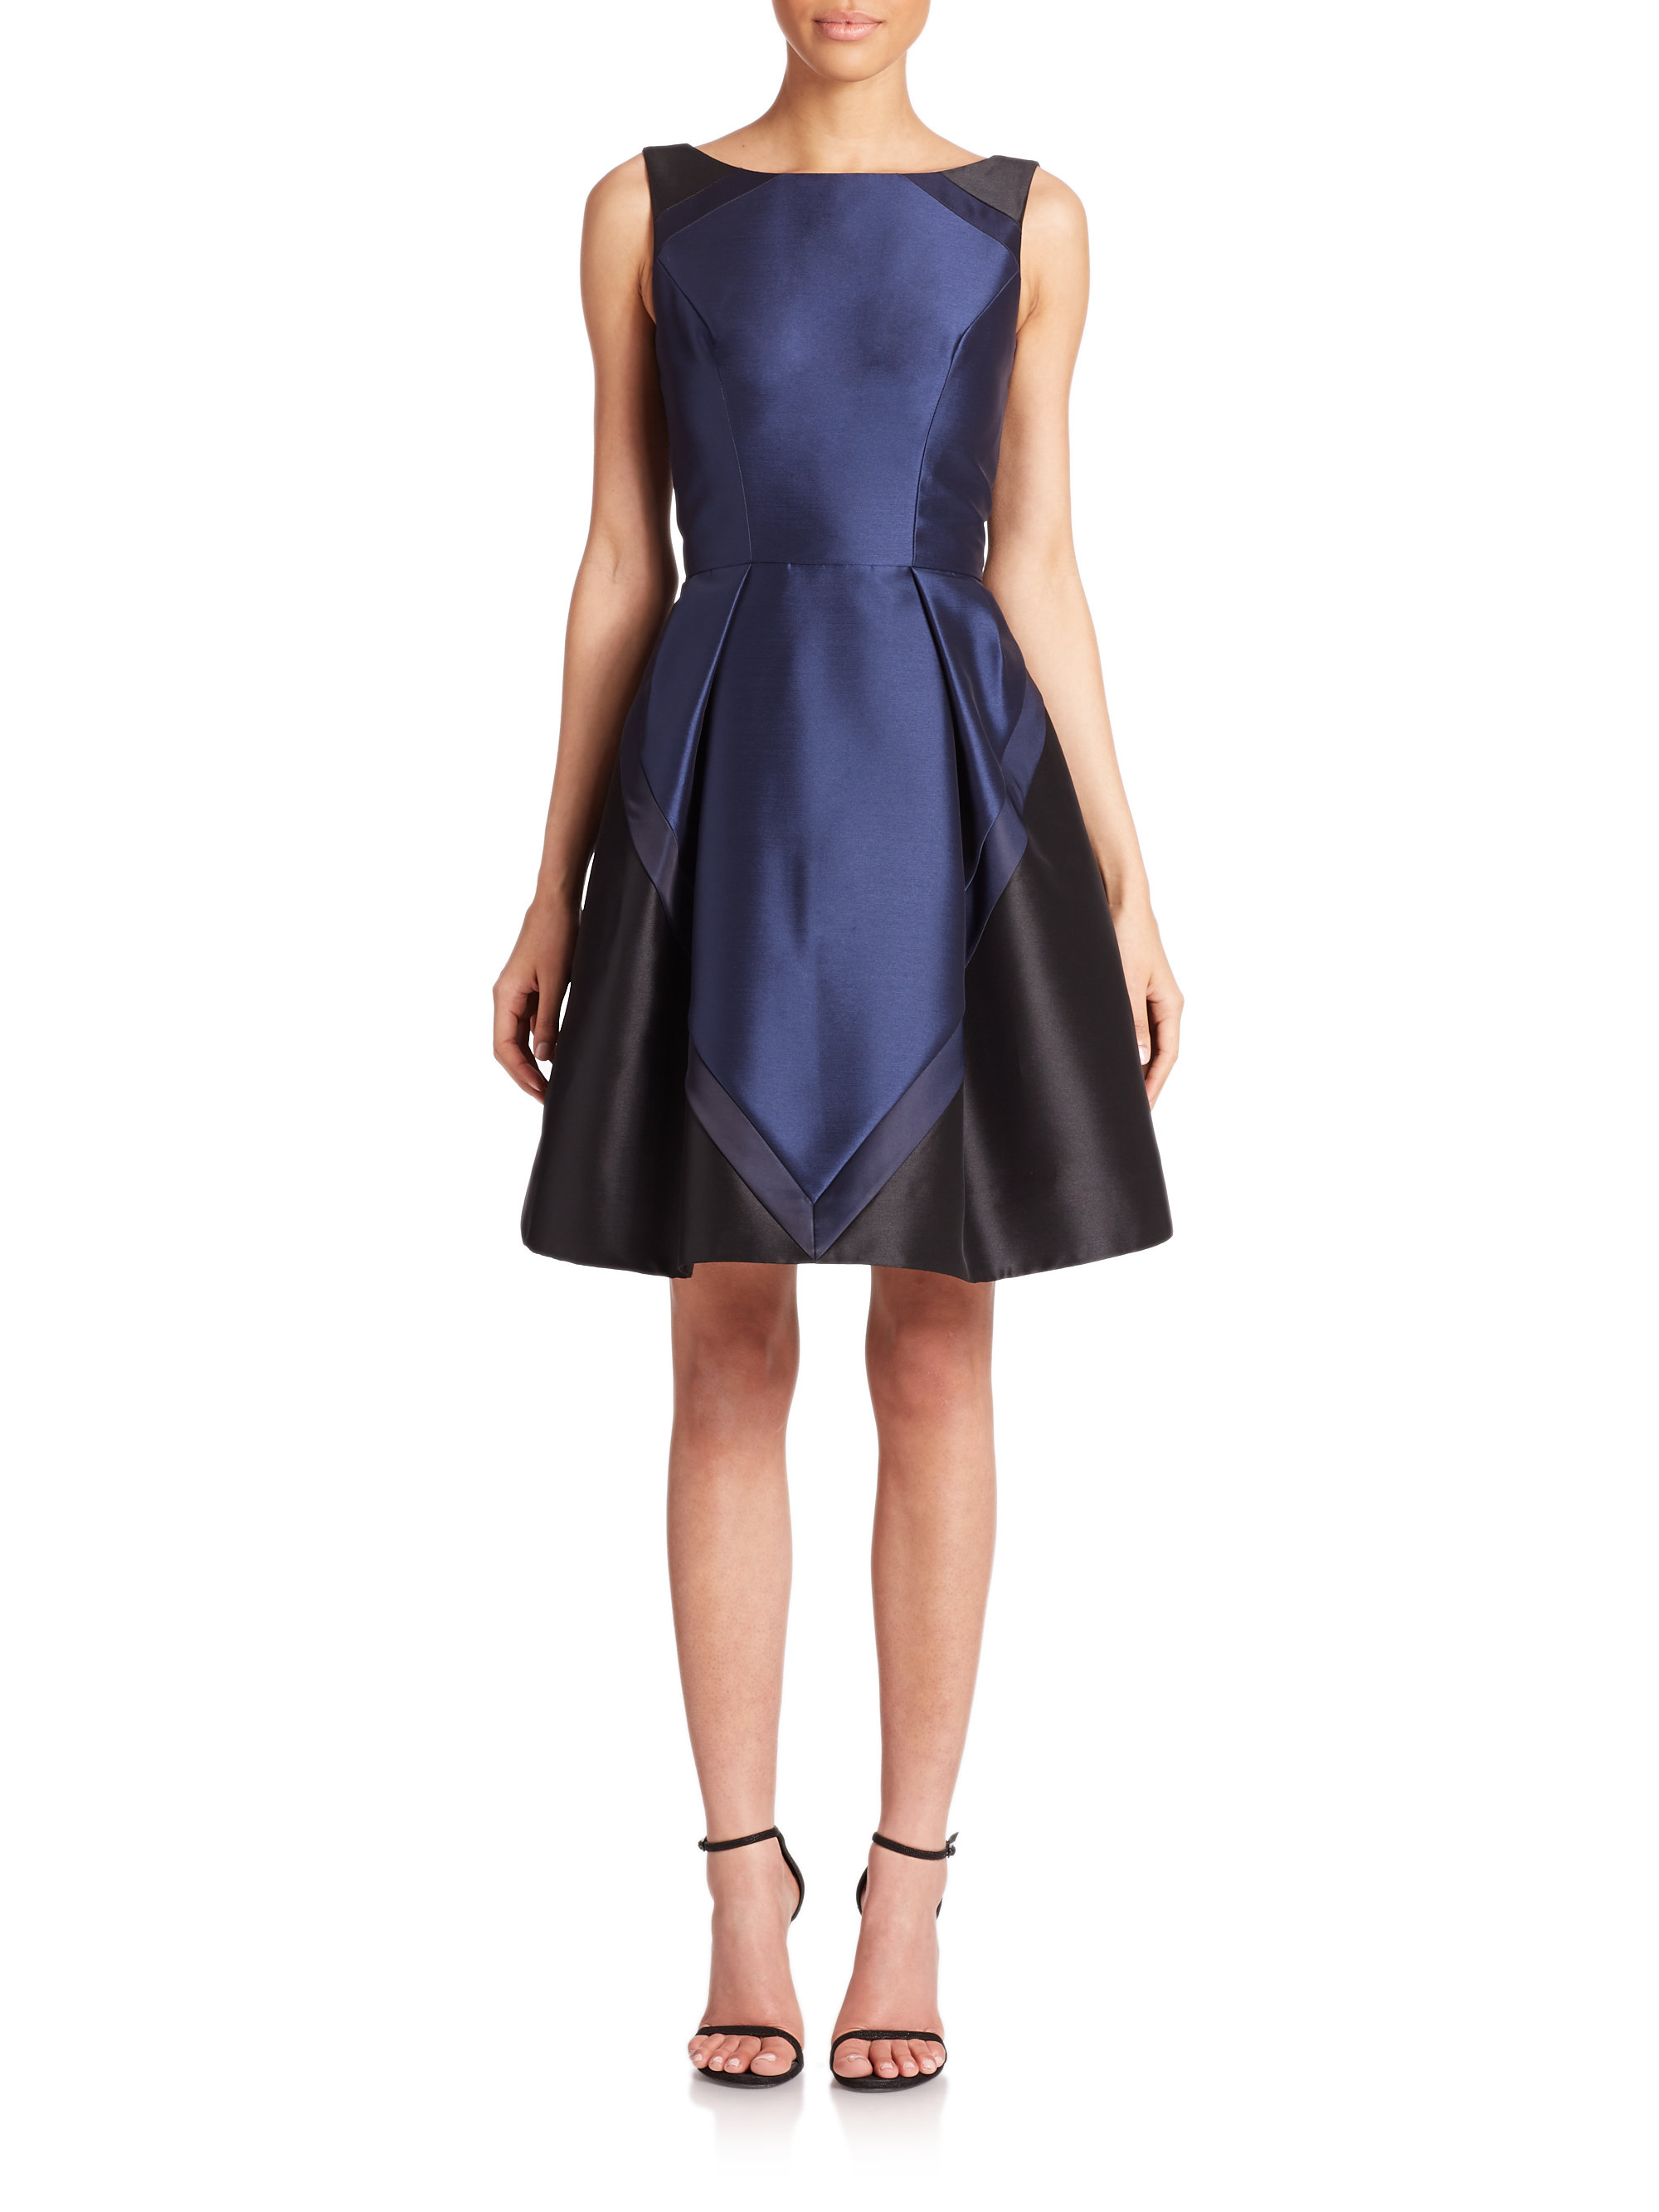 Lyst - THEIA Colorblock Cocktail Dress in Blue